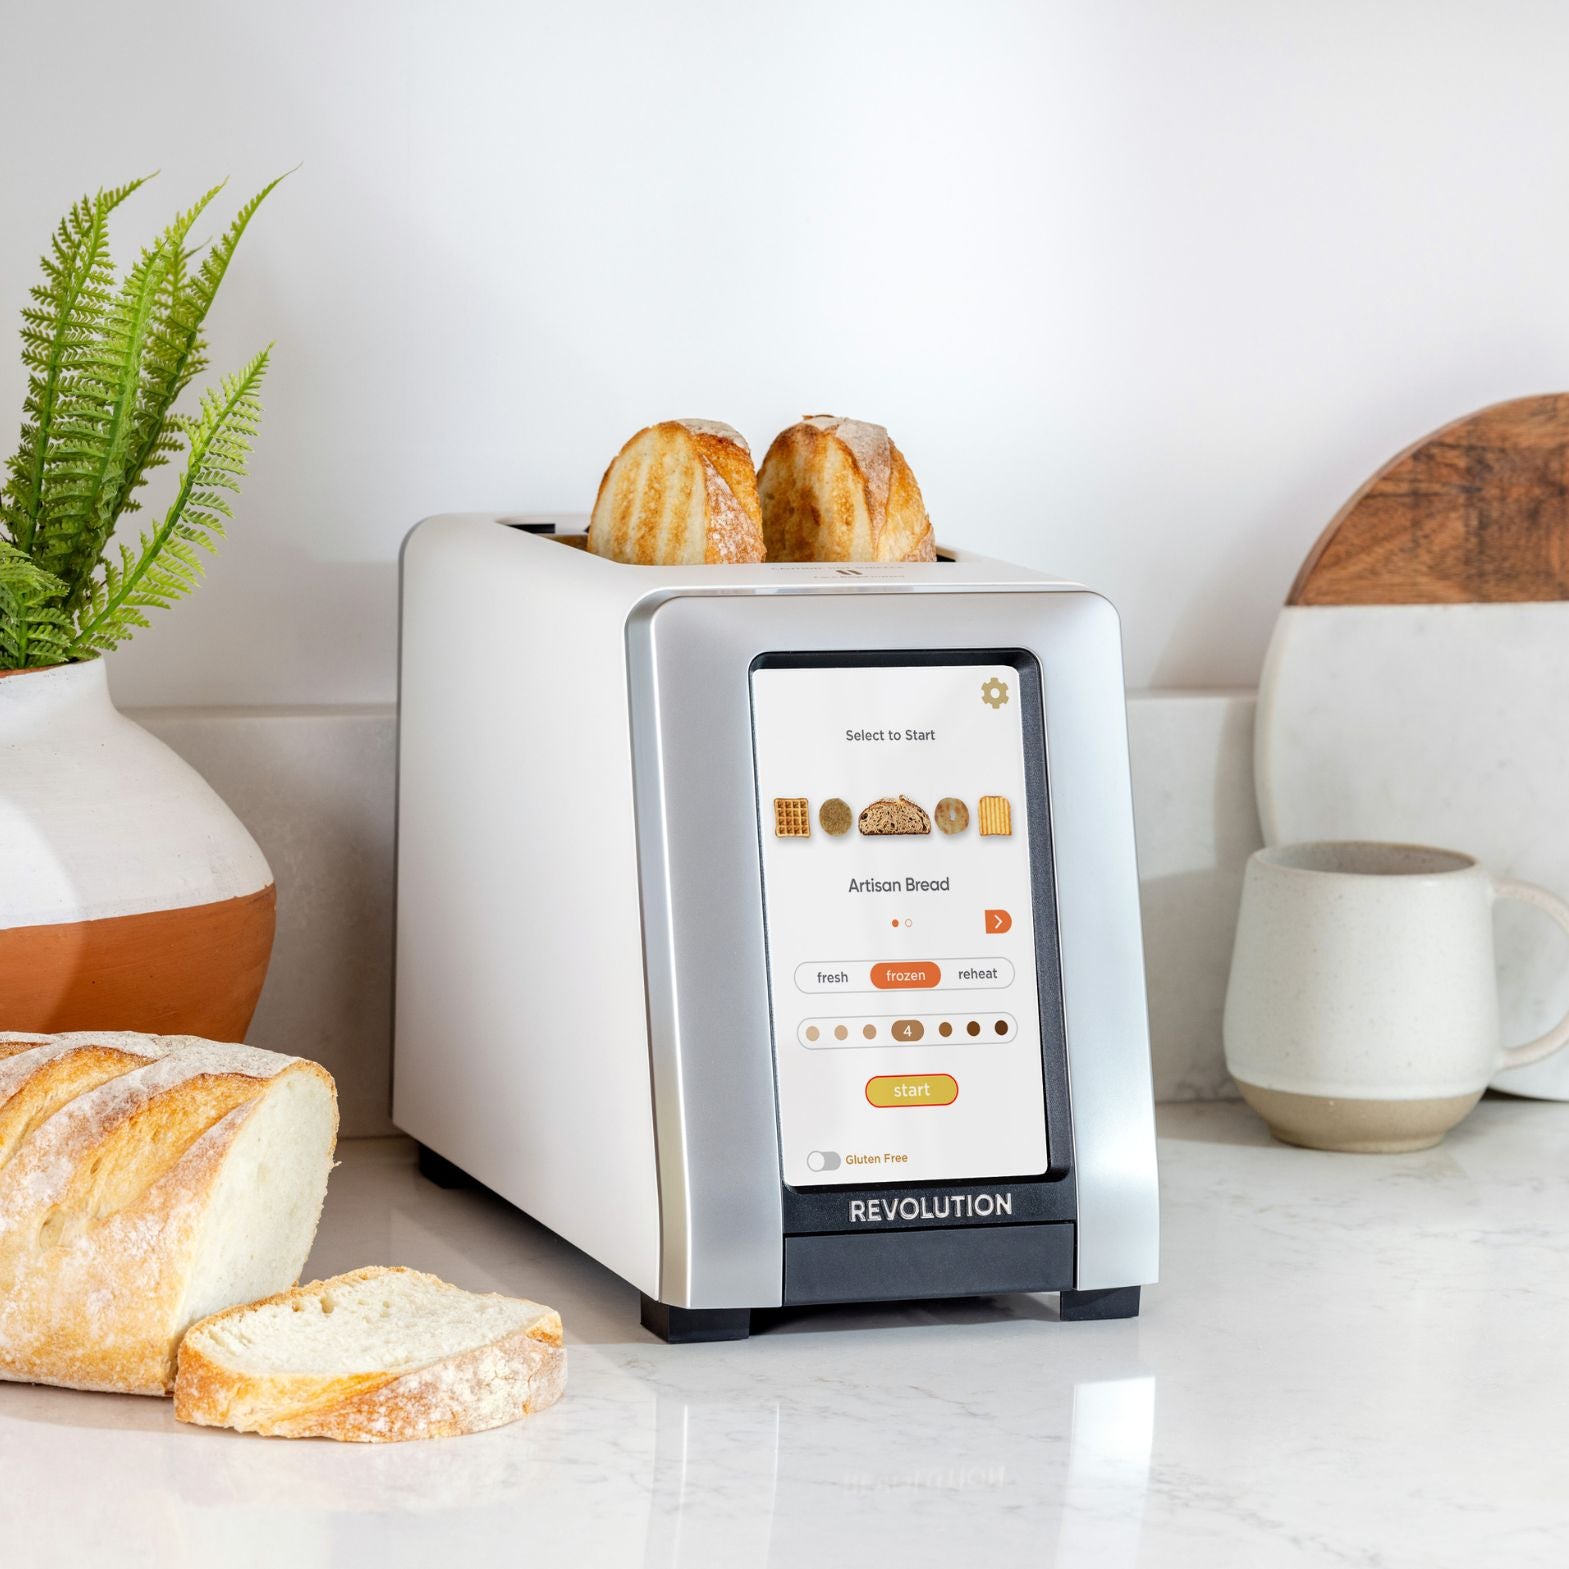 The BEST feature is at the end! 😋 @Revolution Cooking #finds #a, revolution  toaster